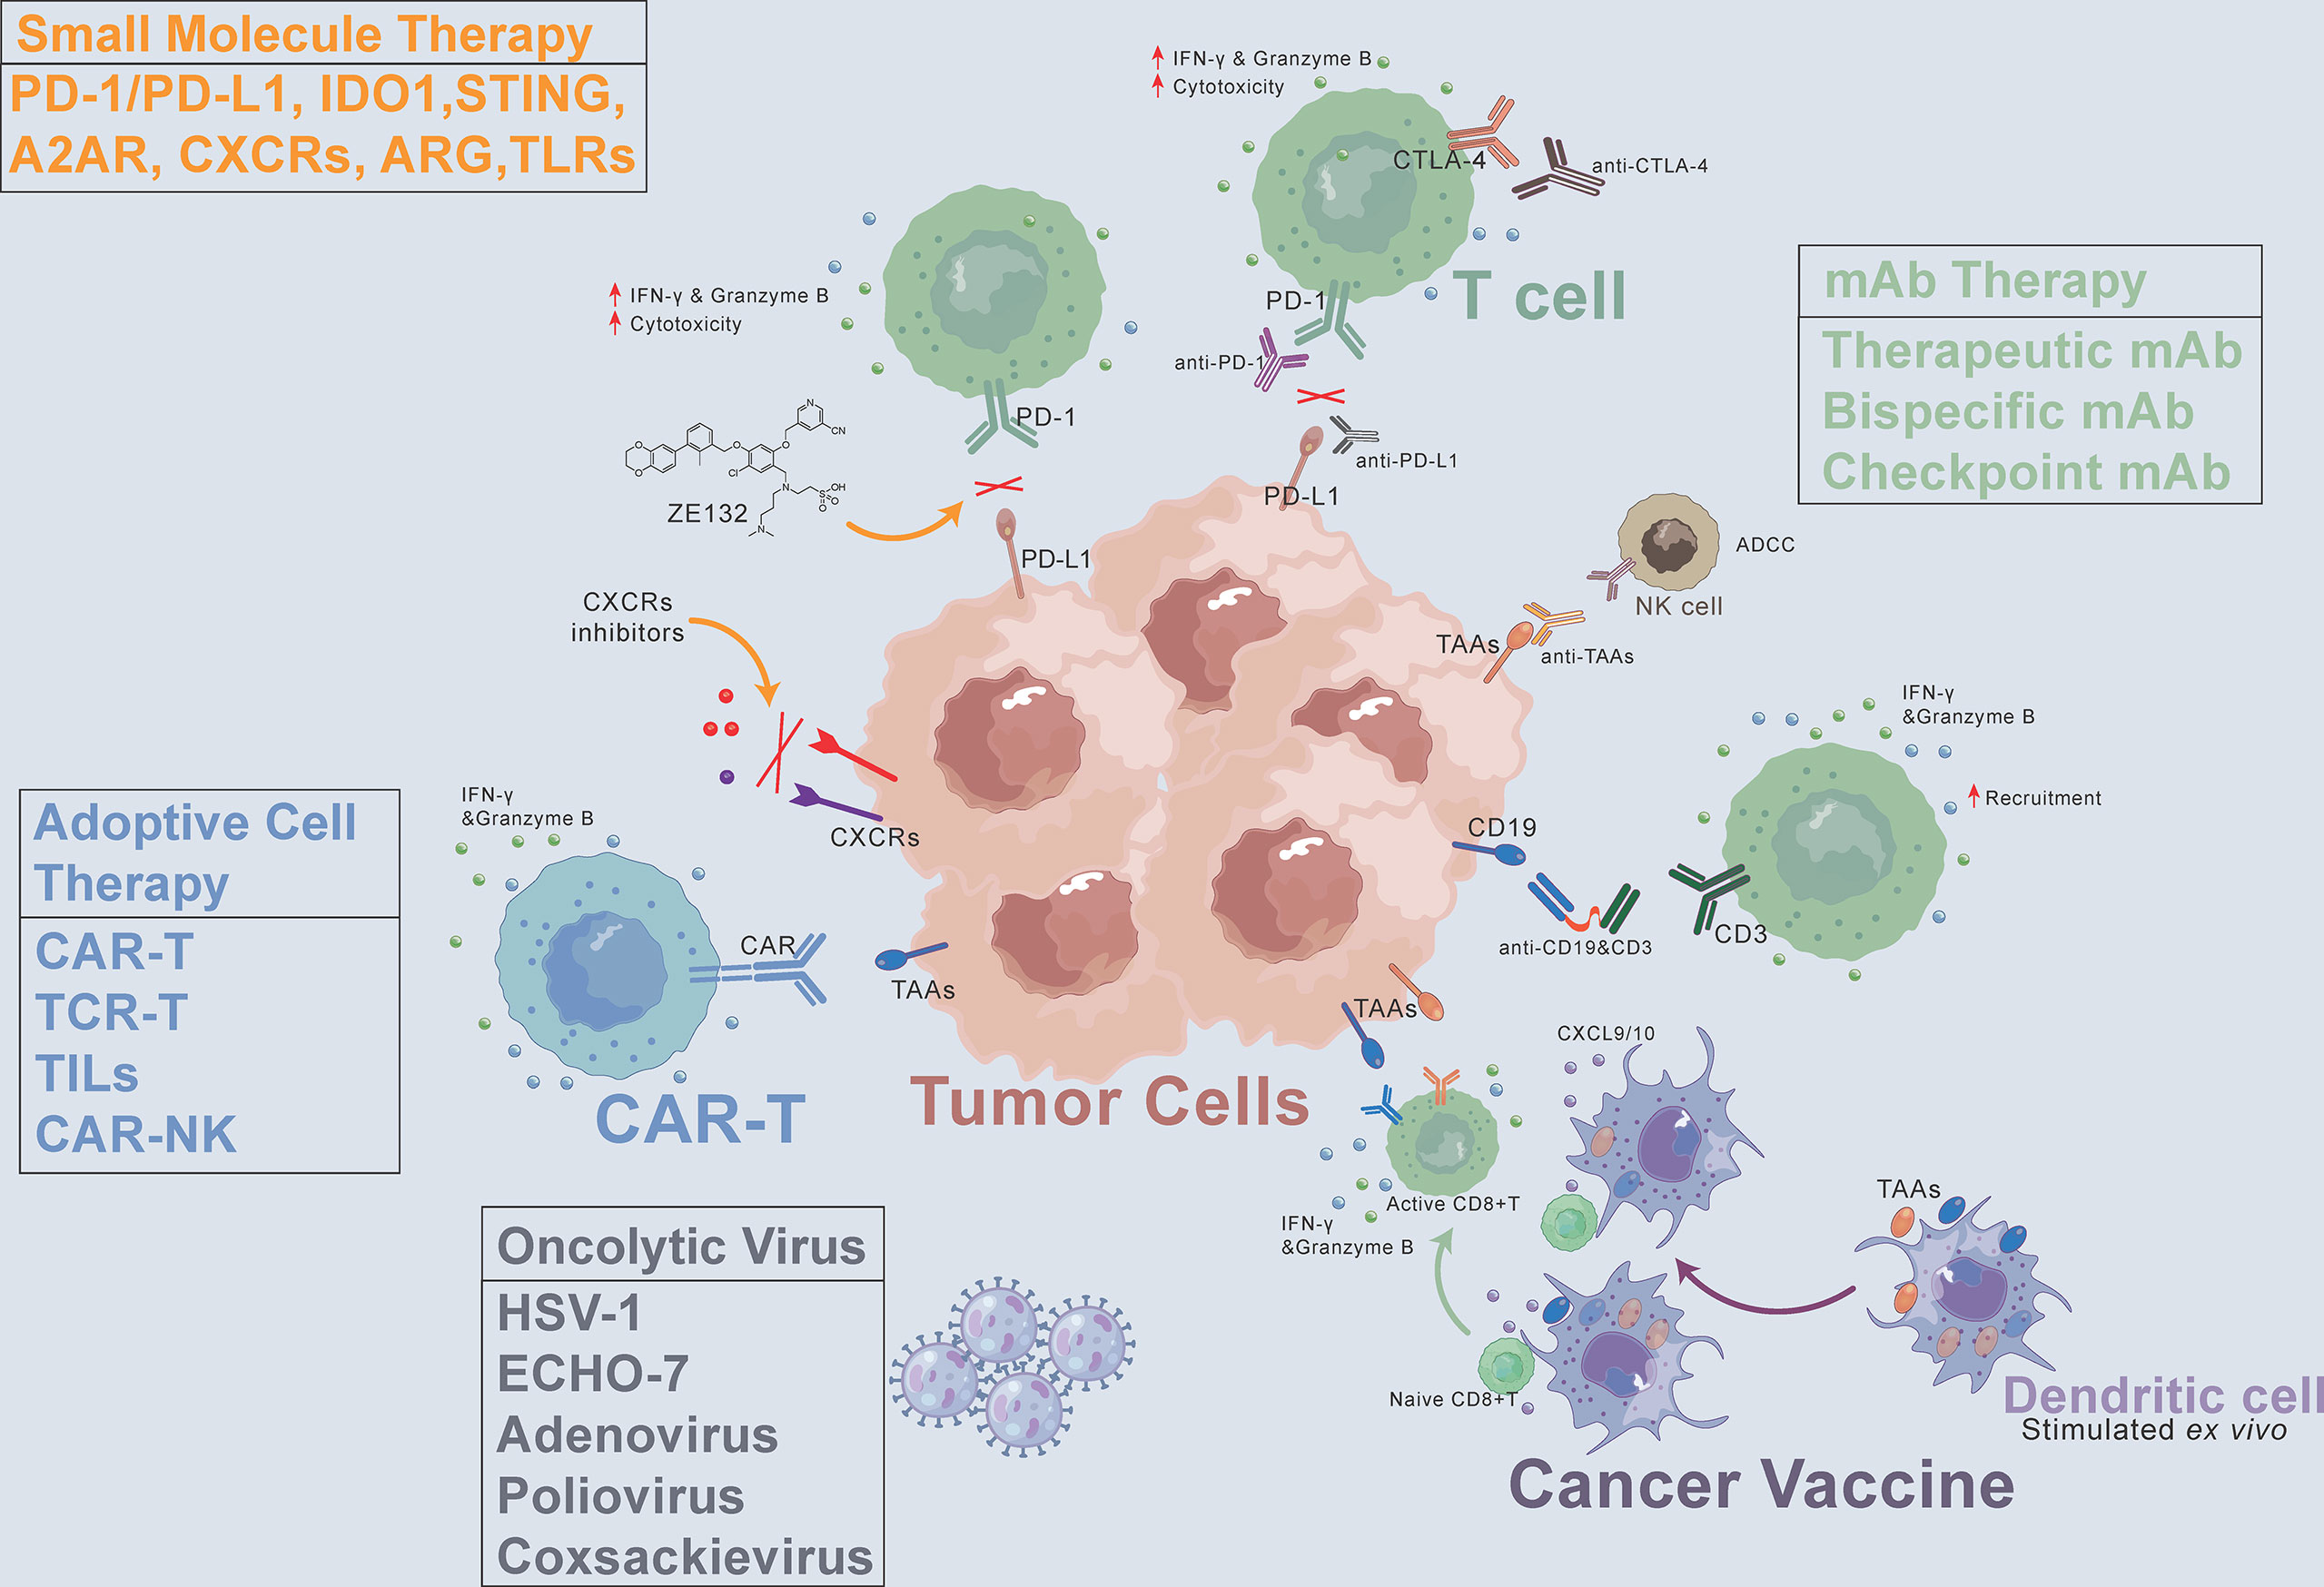 Frontiers | Clinical cancer immunotherapy: Current progress and